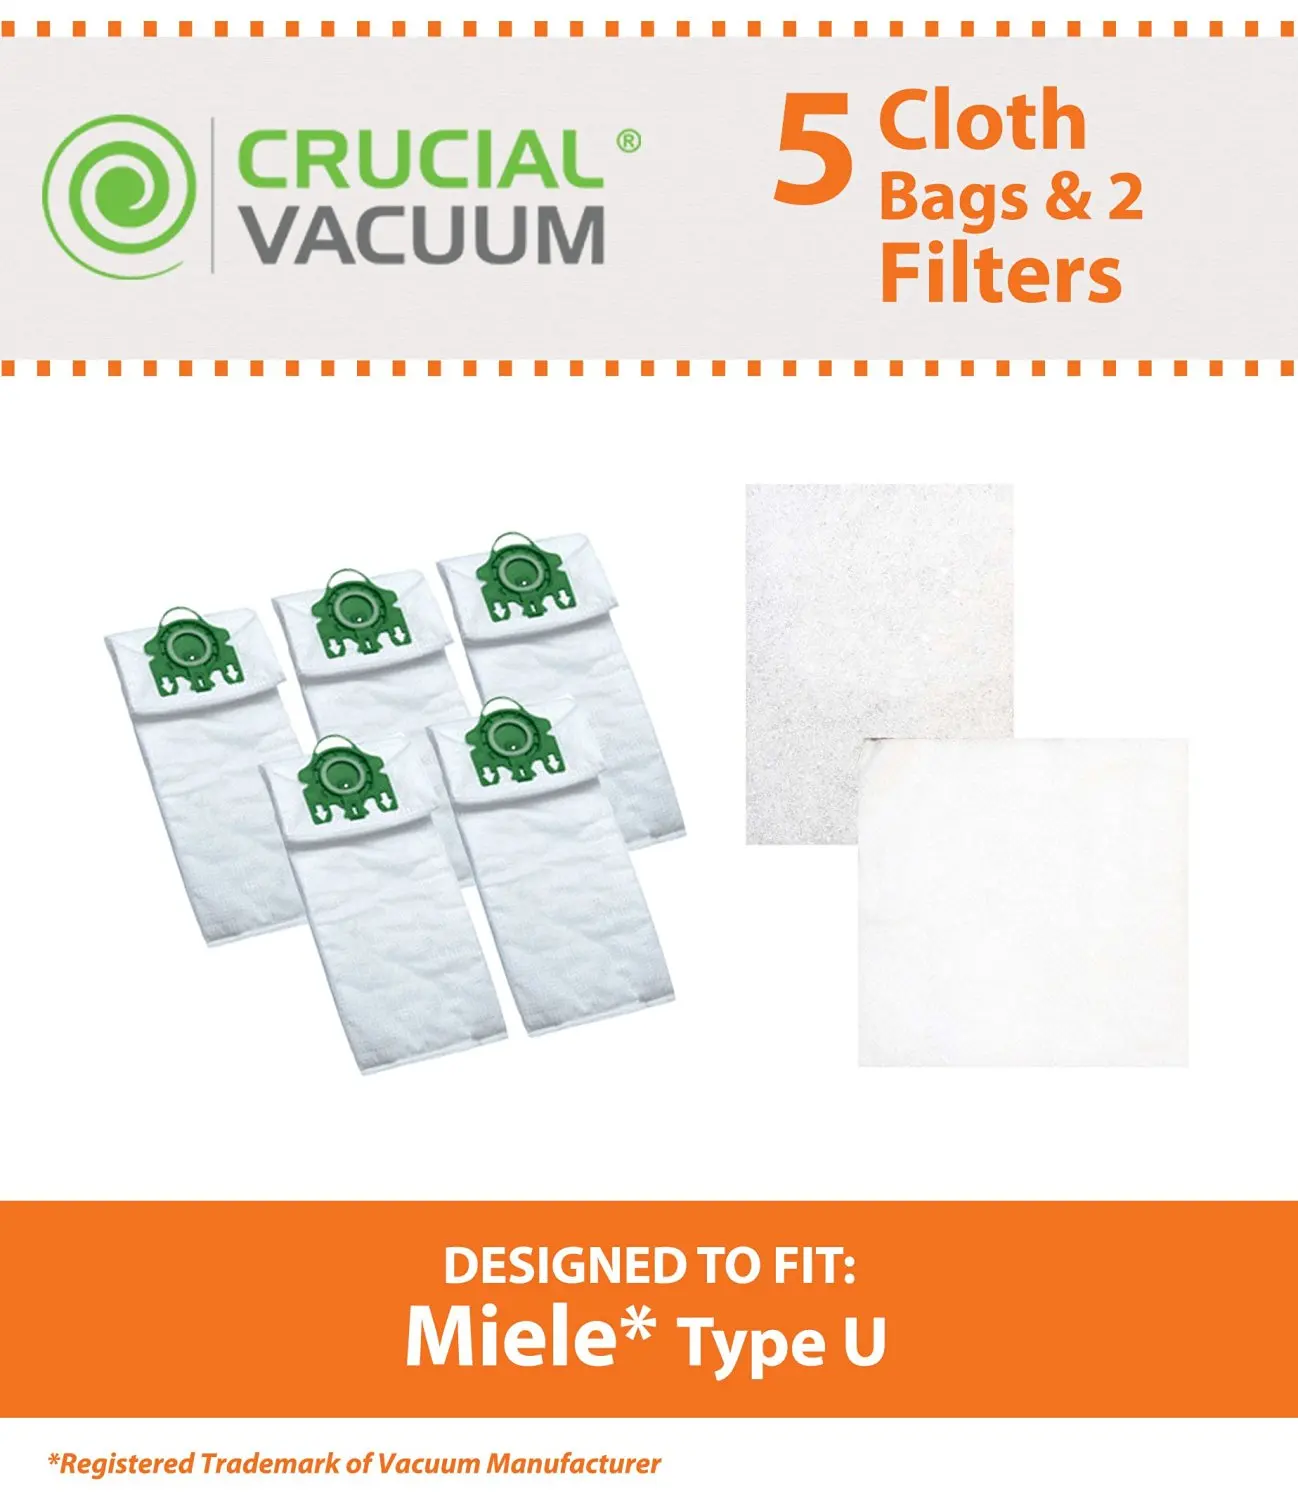 20 Vacuum Bags /& 20 Micro Filters for Miele S194 Quickstep S164 Type K//K S146